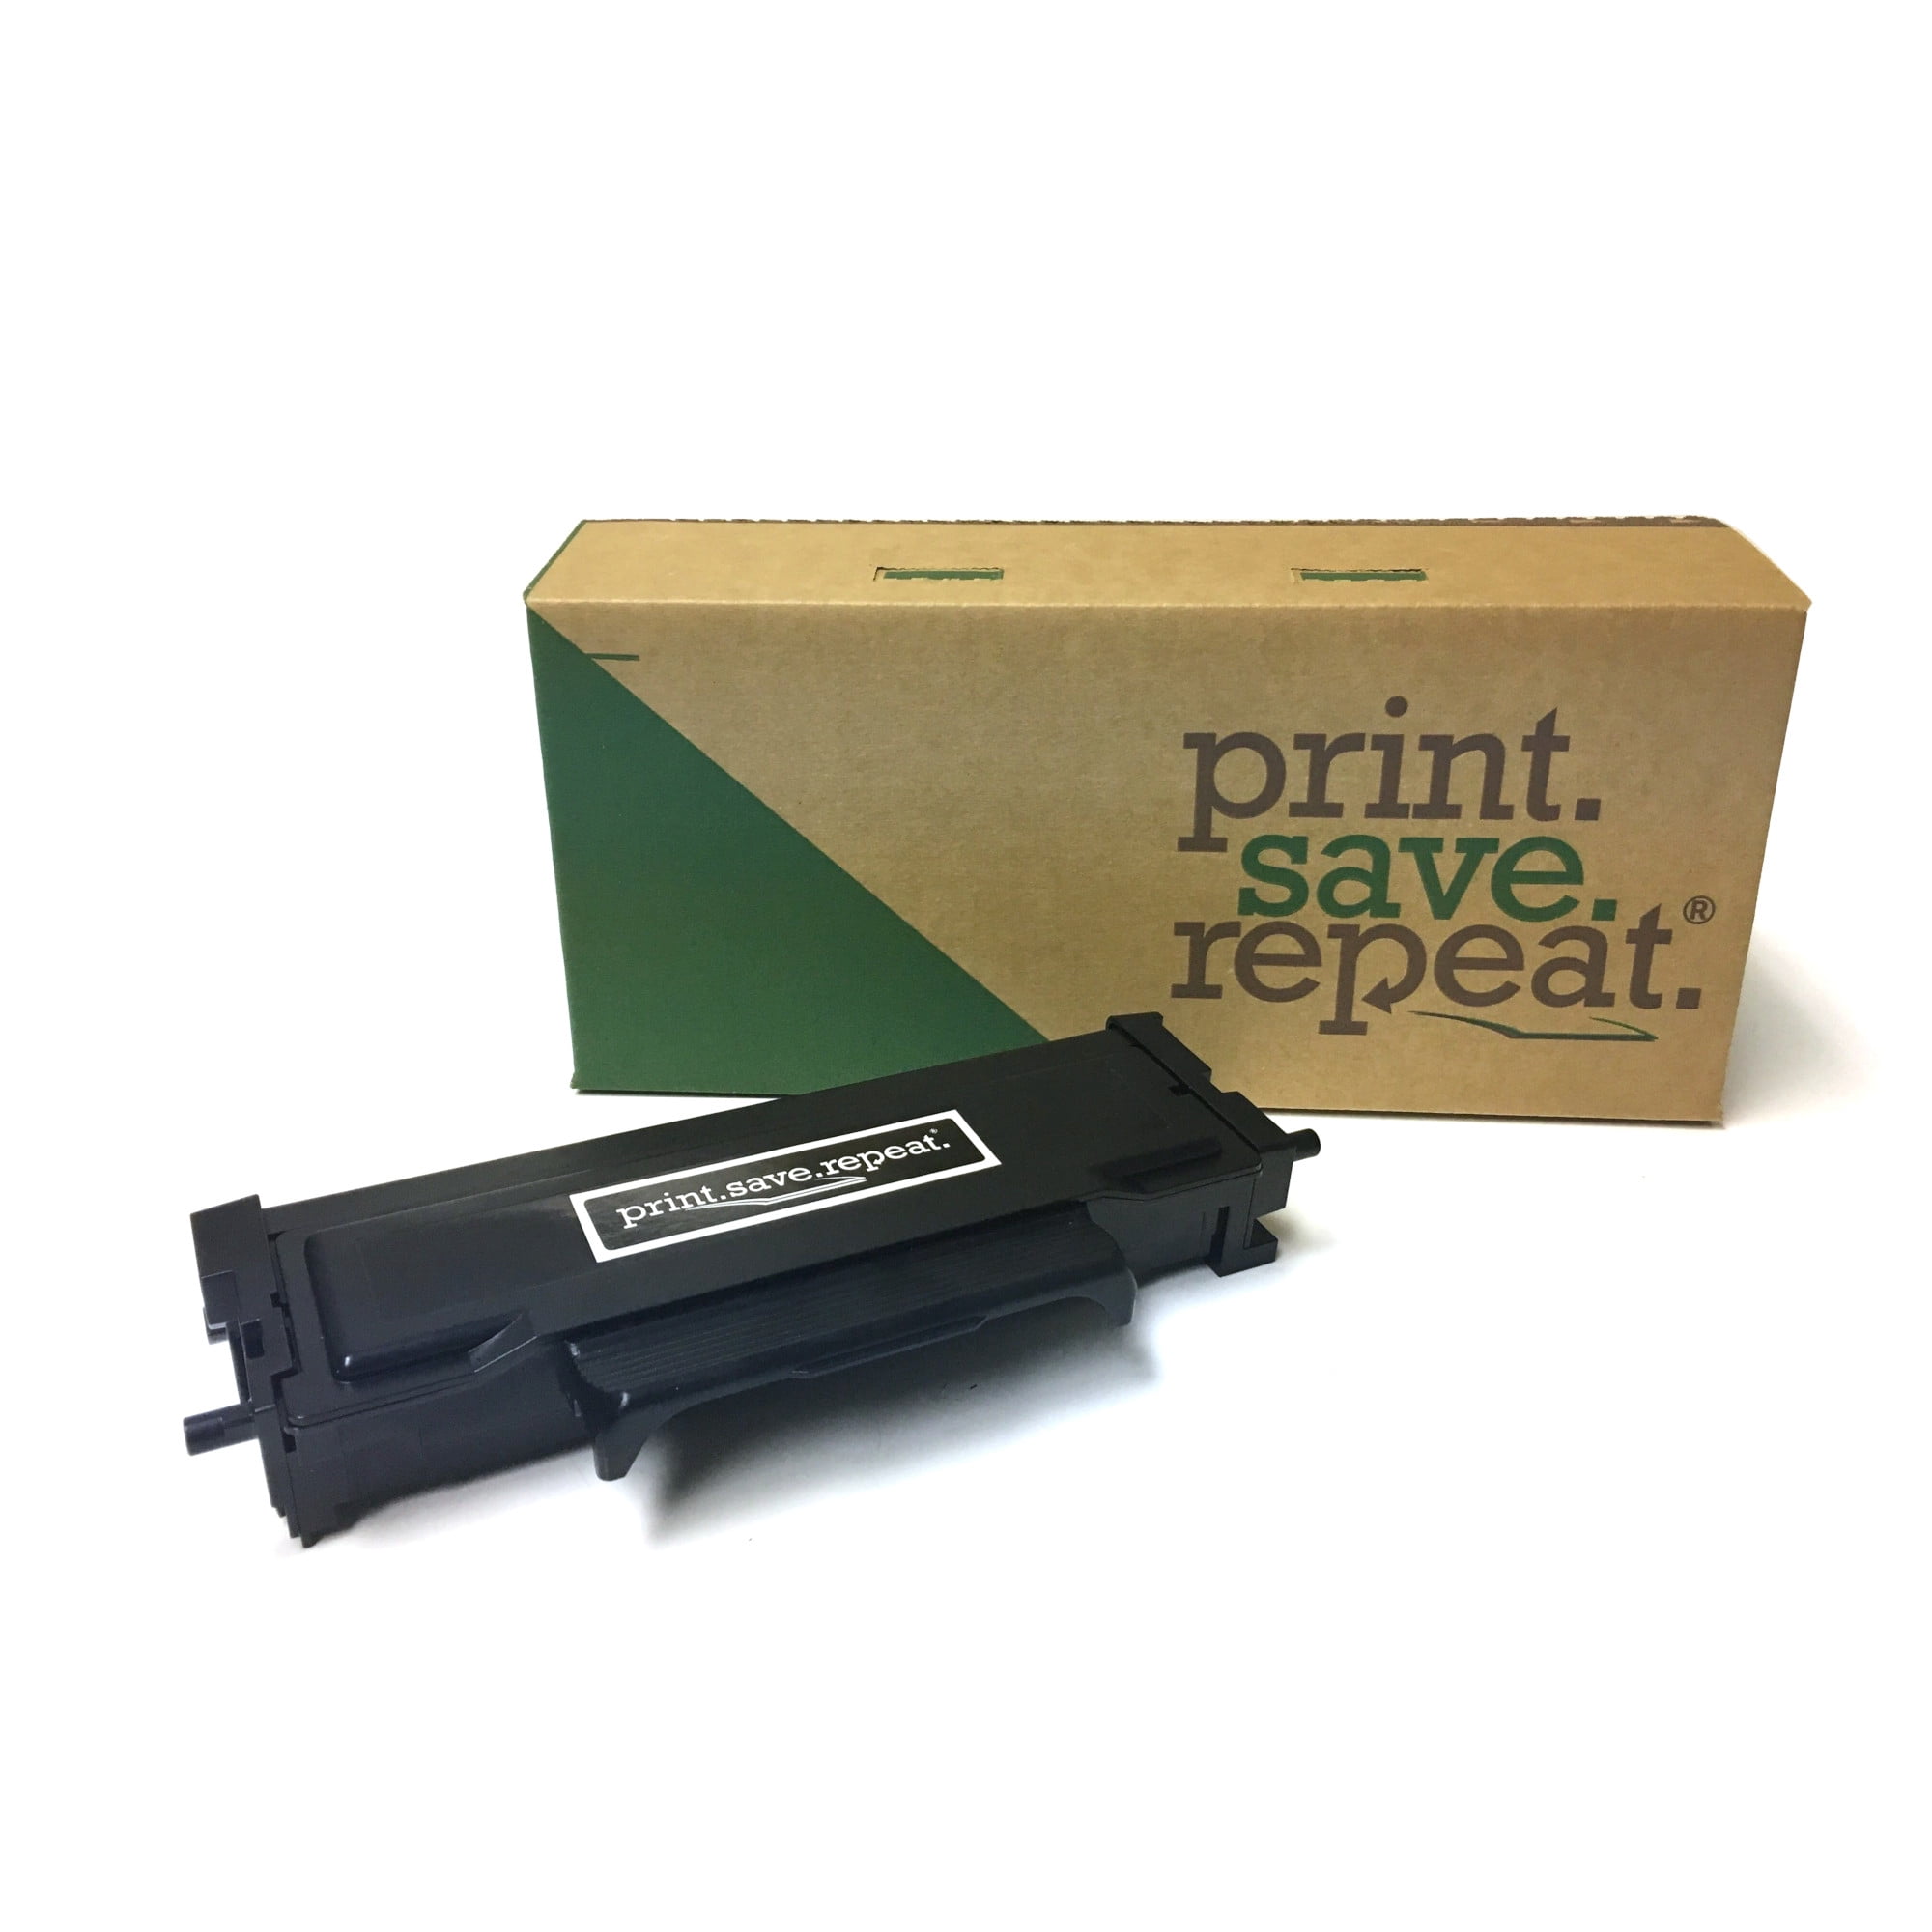 Smash Year rich Print.Save.Repeat. Lexmark B221000 Remanufactured Toner Cartridge for  B2236, MB2236 [1,200 Pages] | Walmart Canada